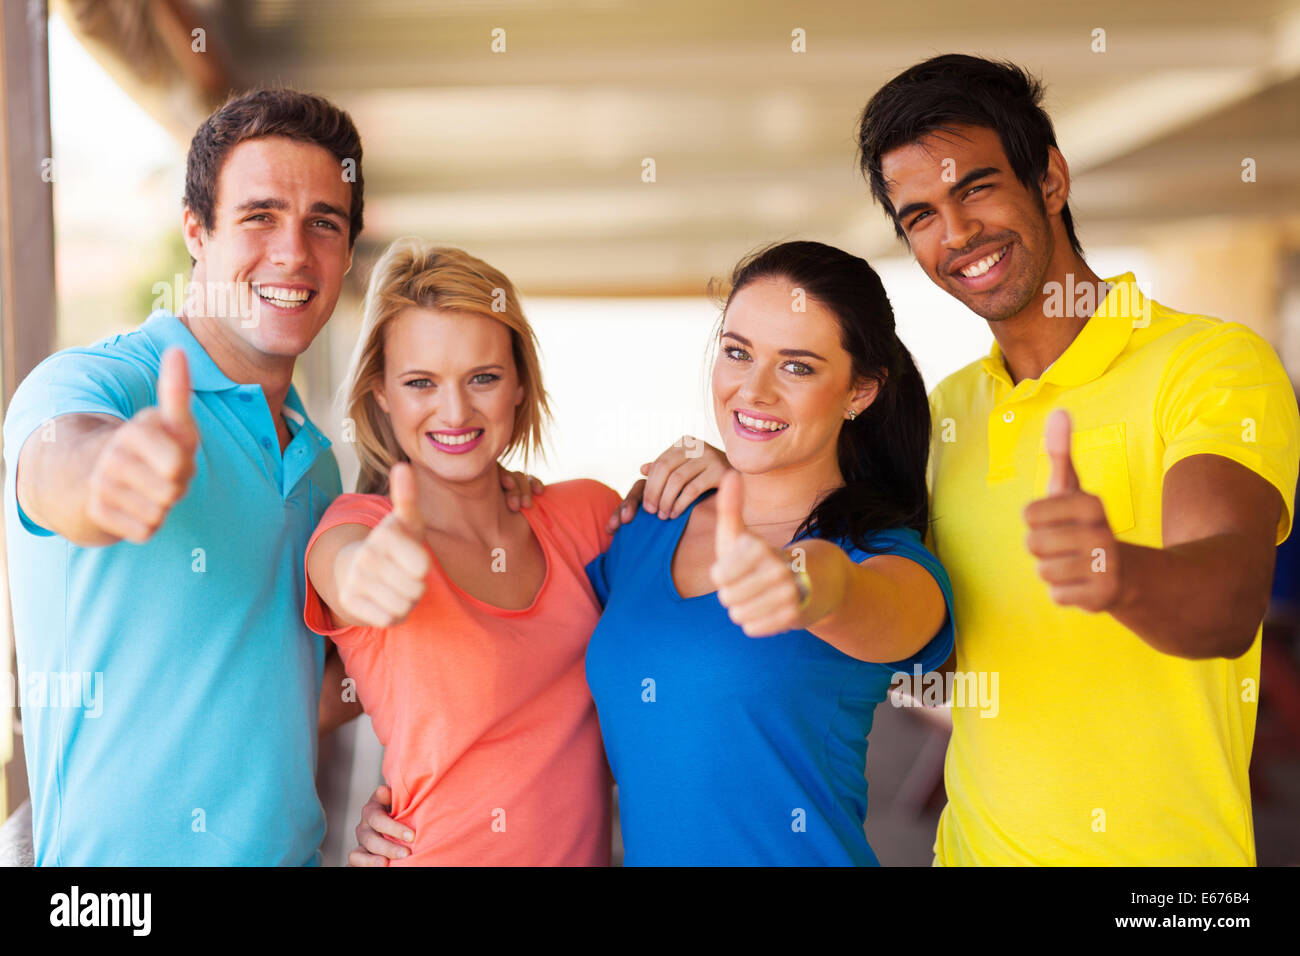 group of cheerful friends giving thumbs up Stock Photo